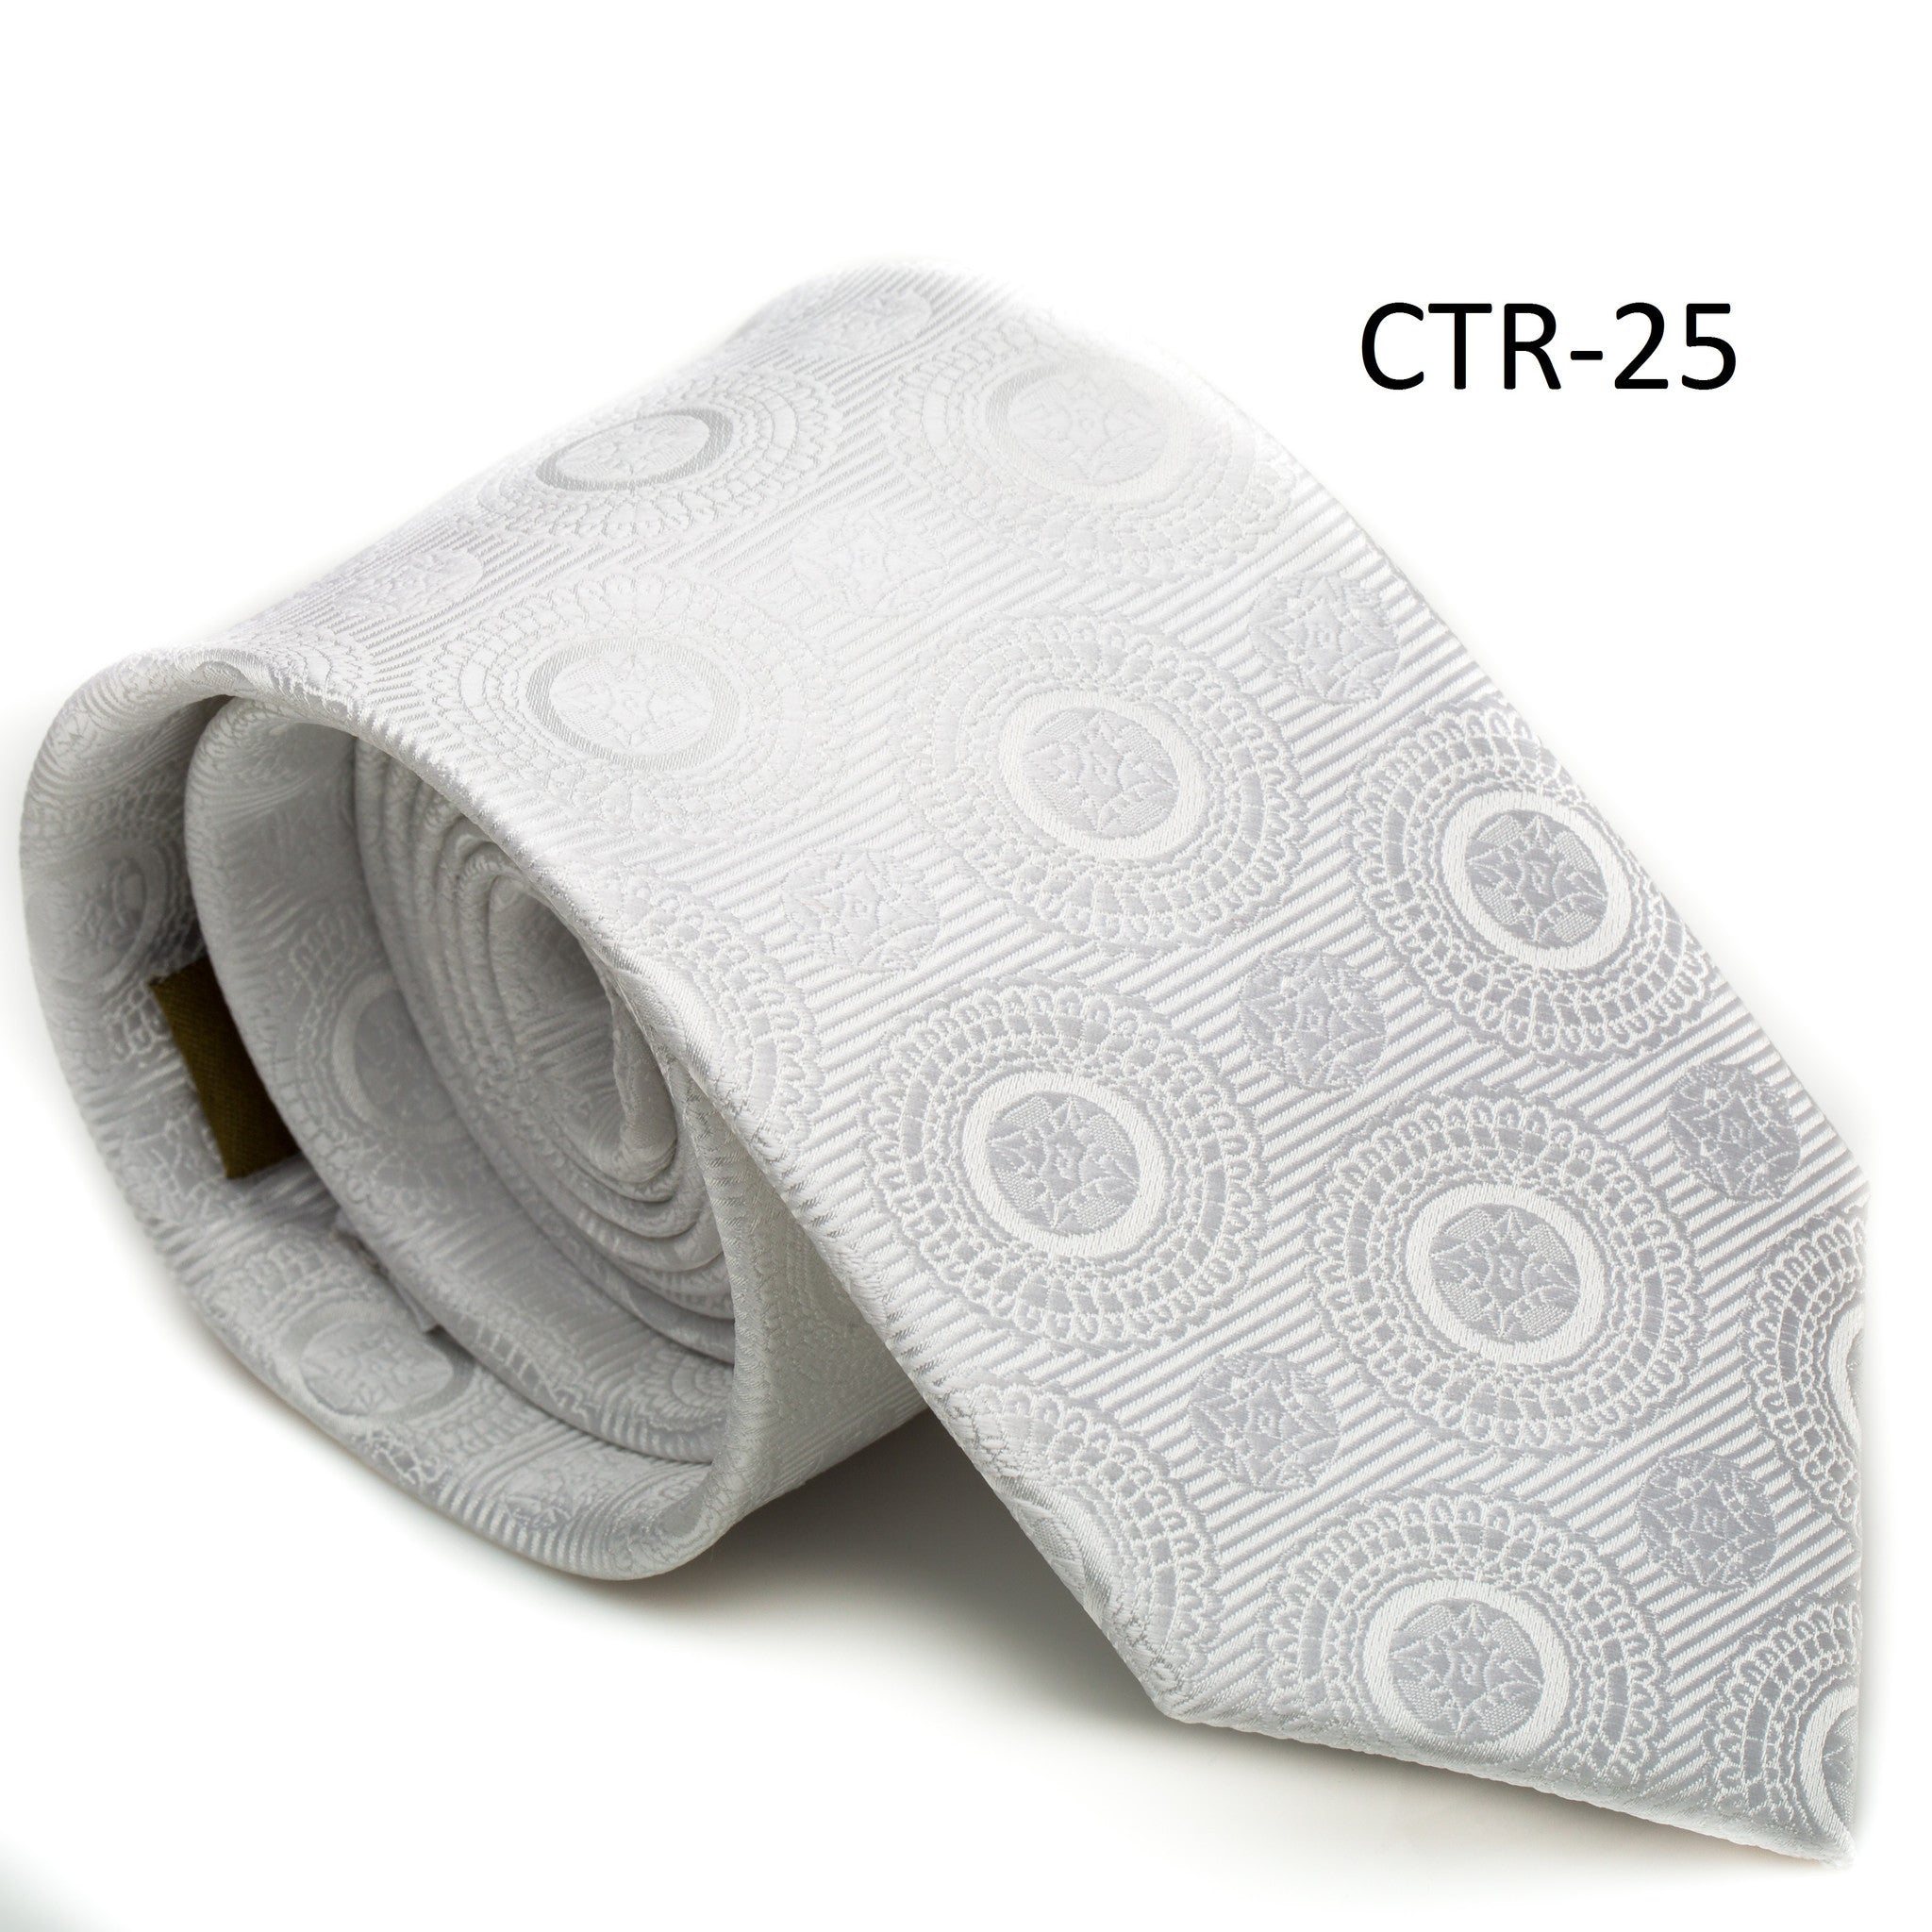 White Temple/ Baptism Tie by CTR Clothing - The Kater Shop - 1